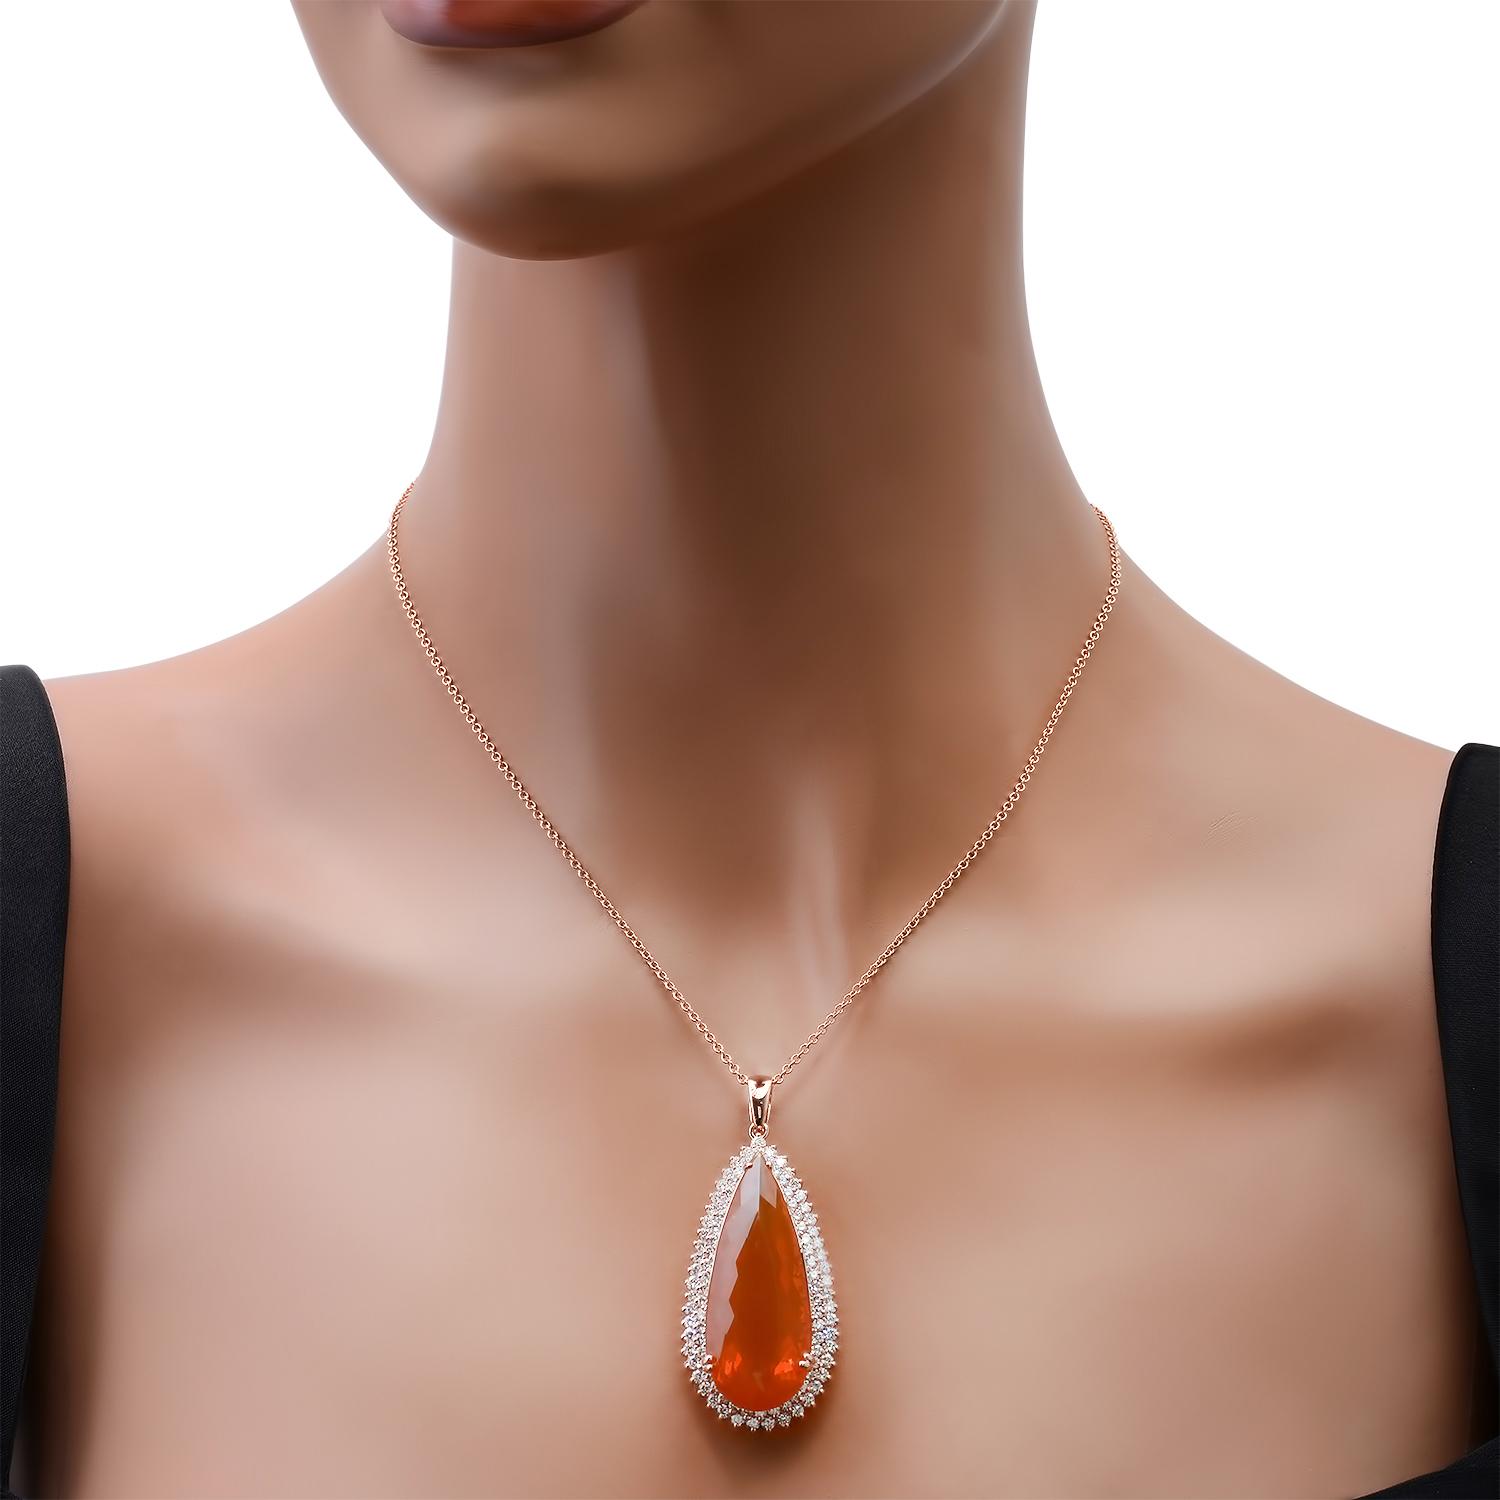 14K Yellow Gold Setting with 25.83ct Fire Opal and 3.14ct Diamond Pendant